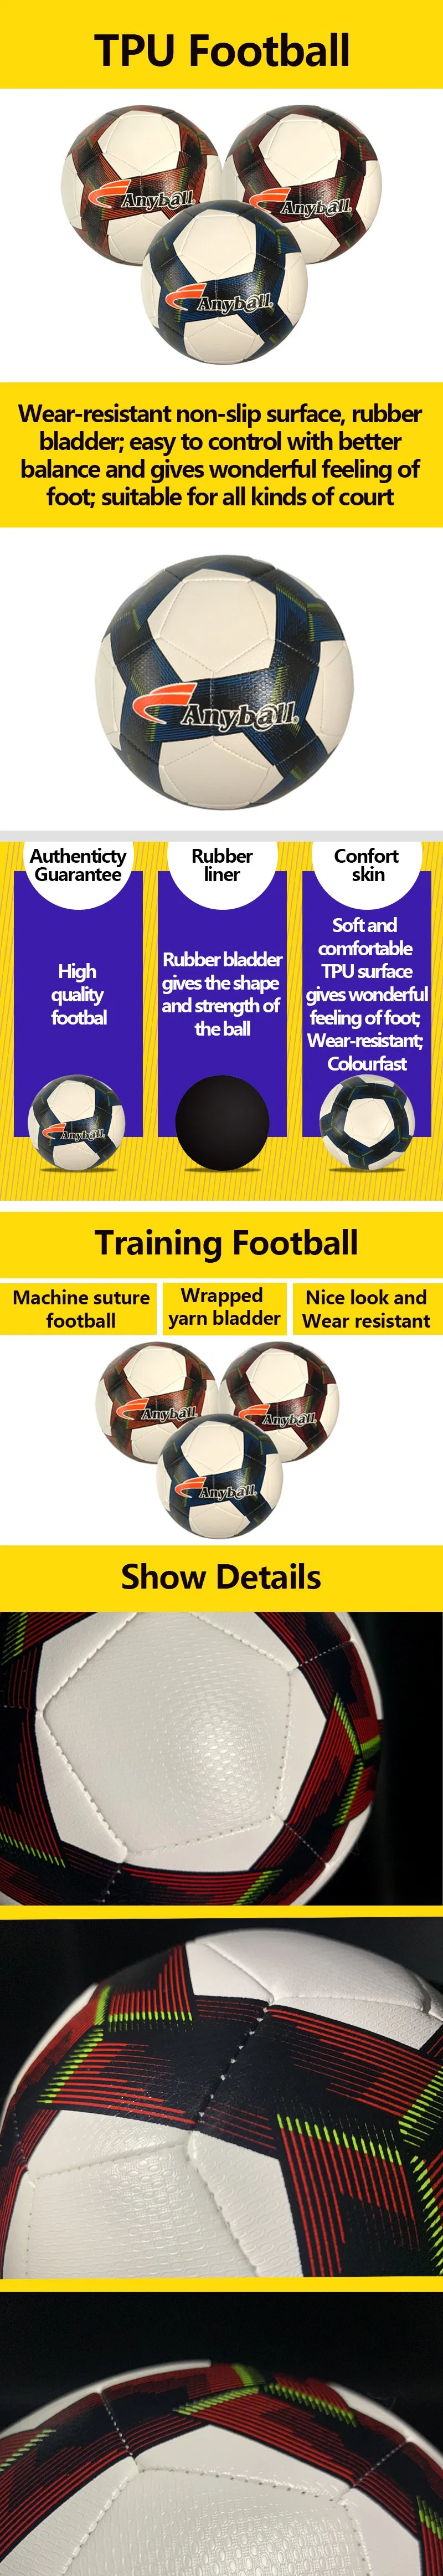 High Quality Official Size 5 Machine Stitched TPU Football Soccer Ball for Competition